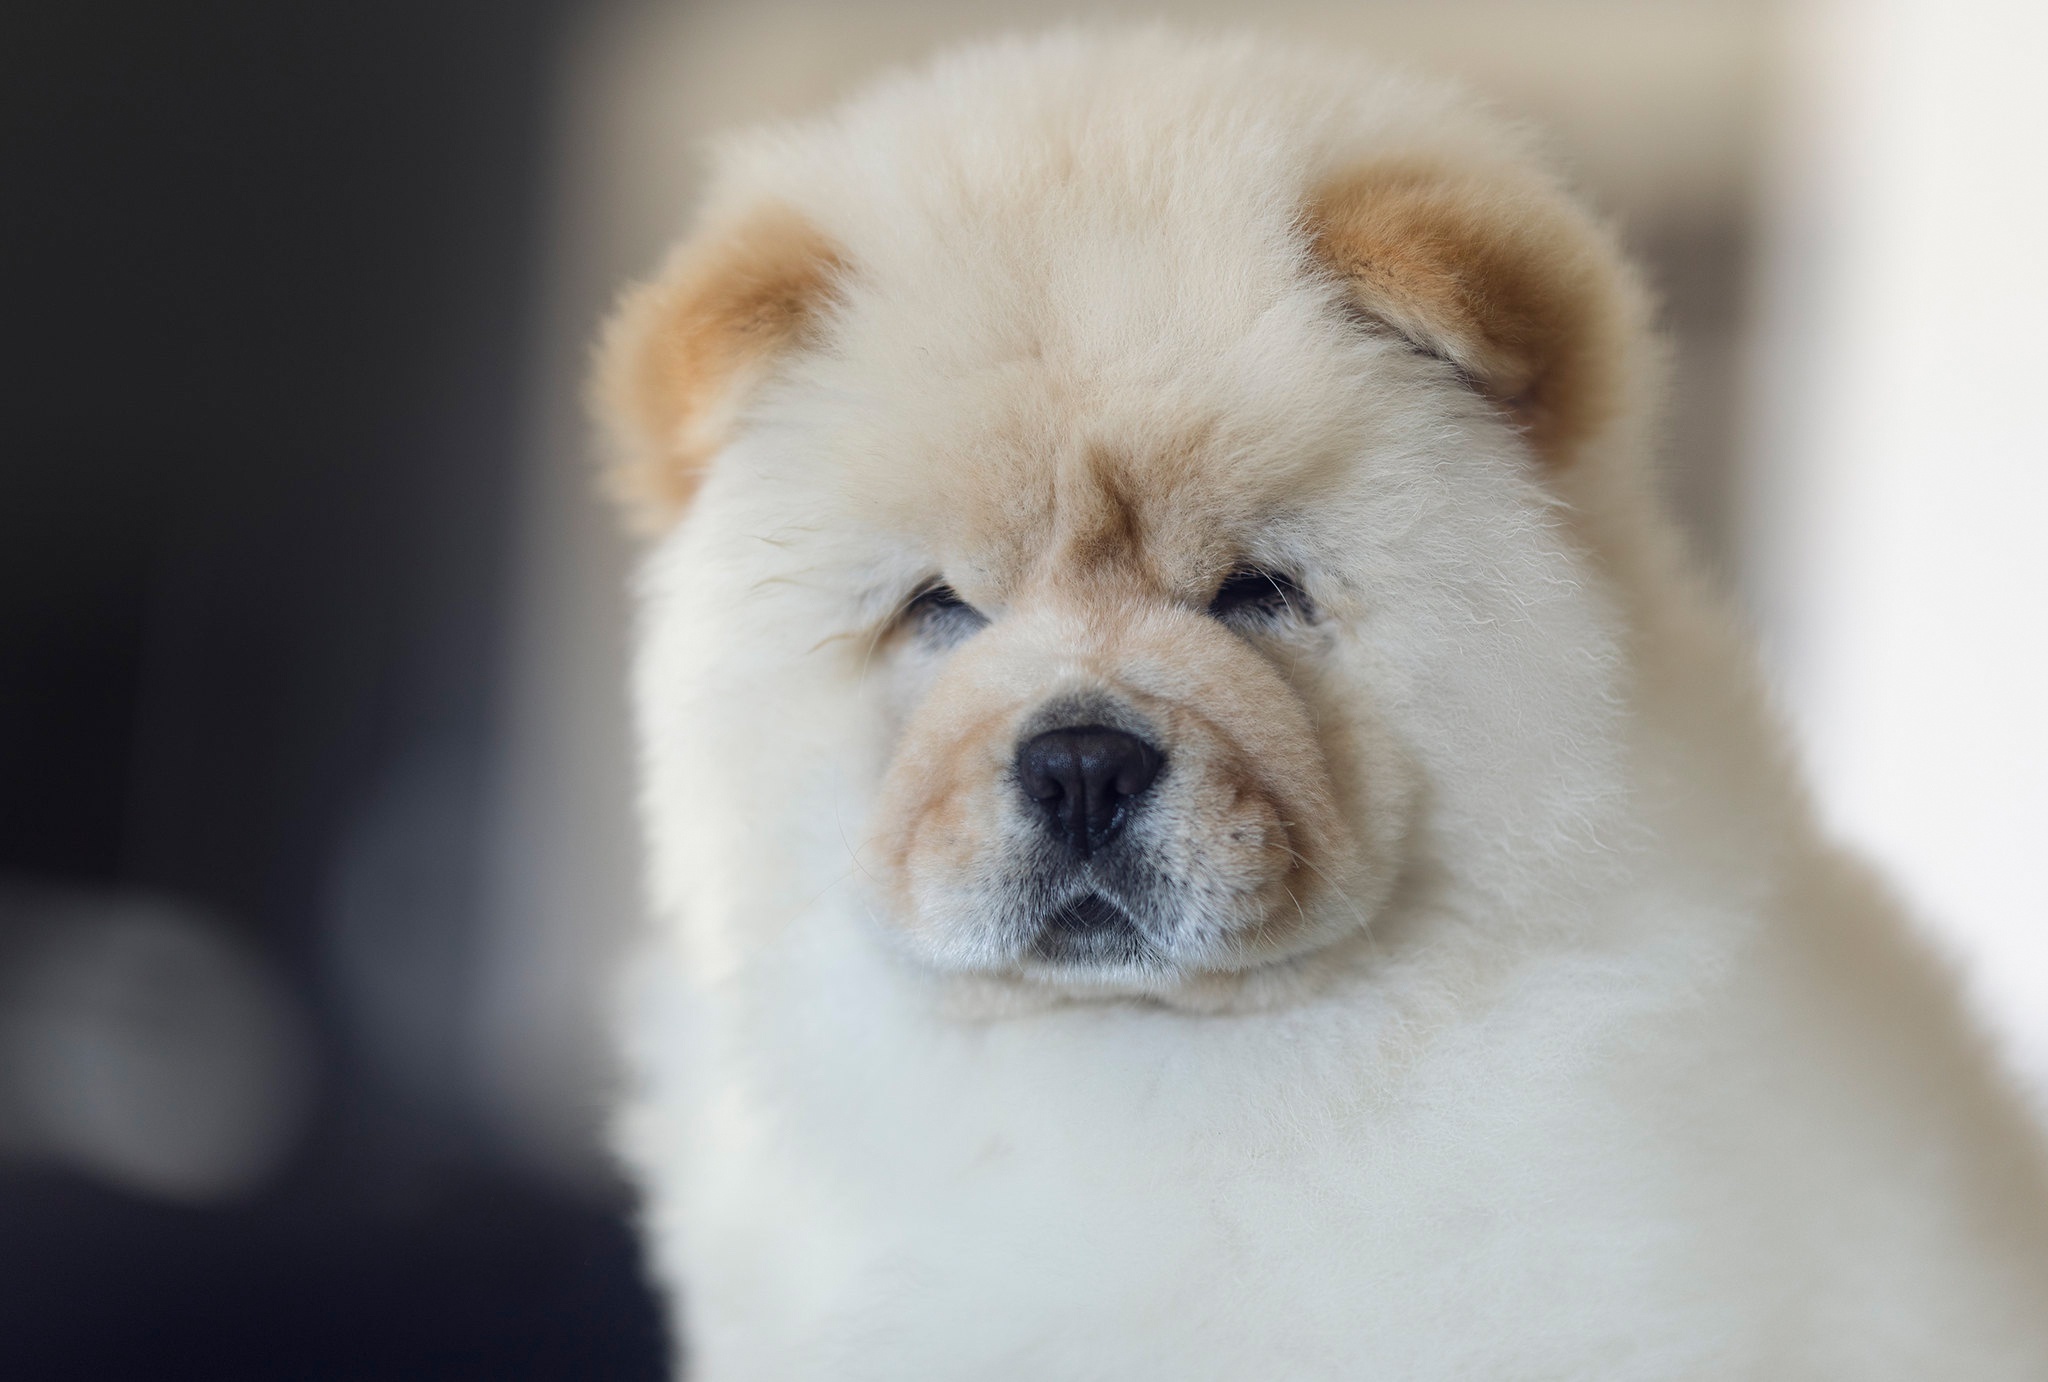 Chow Chow wallpapers, Visual delight, Captivating images, Lovely dogs, 2050x1390 HD Desktop